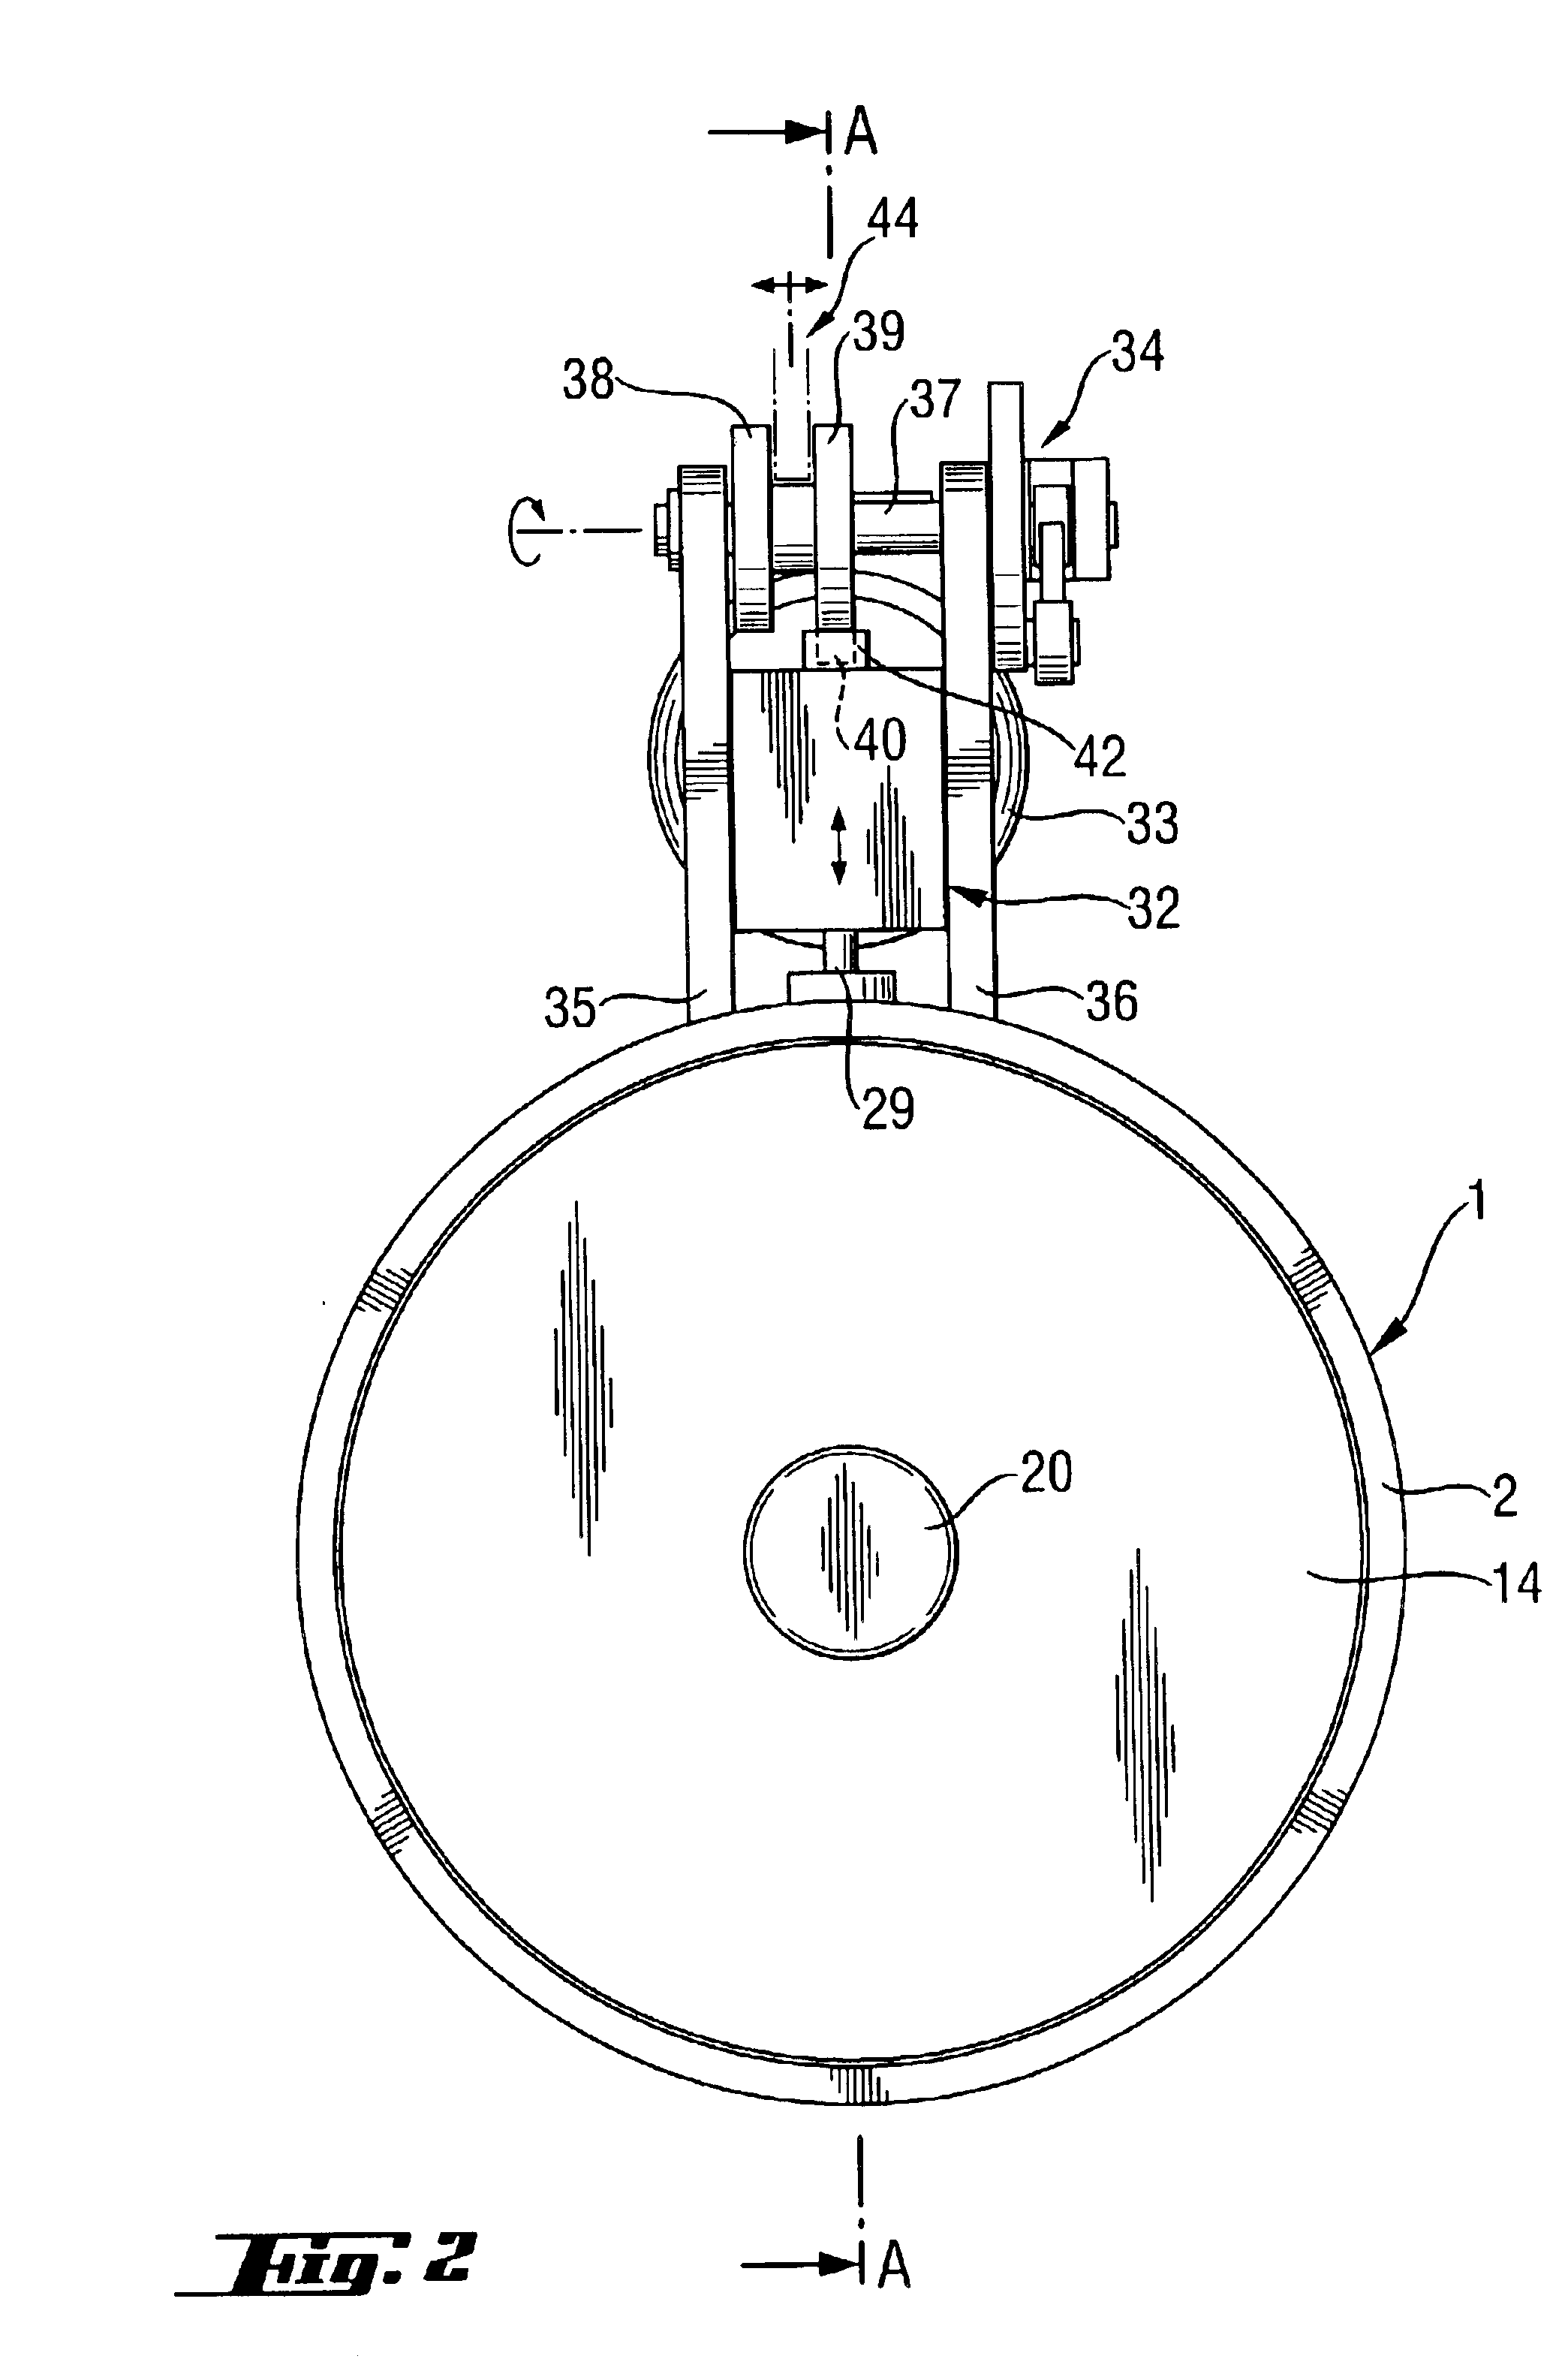 Portable combustion-engined power tool and a method of operating same